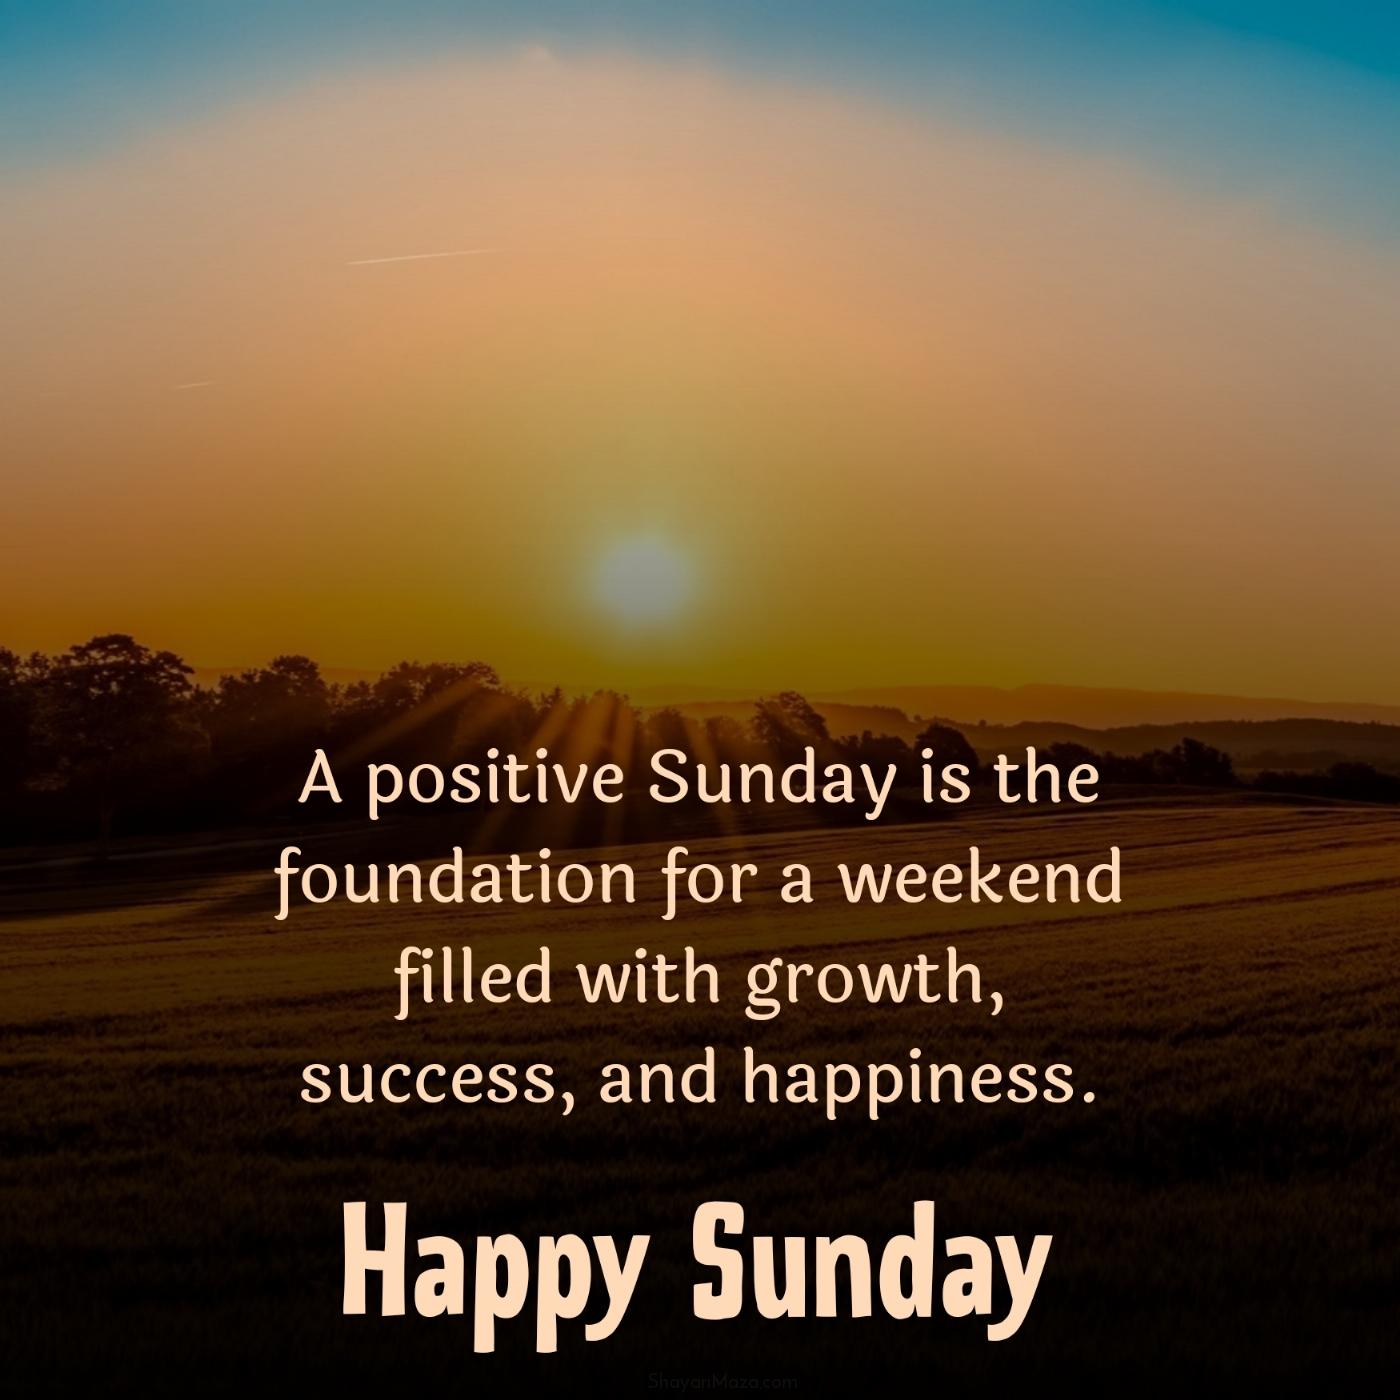 A positive Sunday is the foundation for a weekend filled with growth